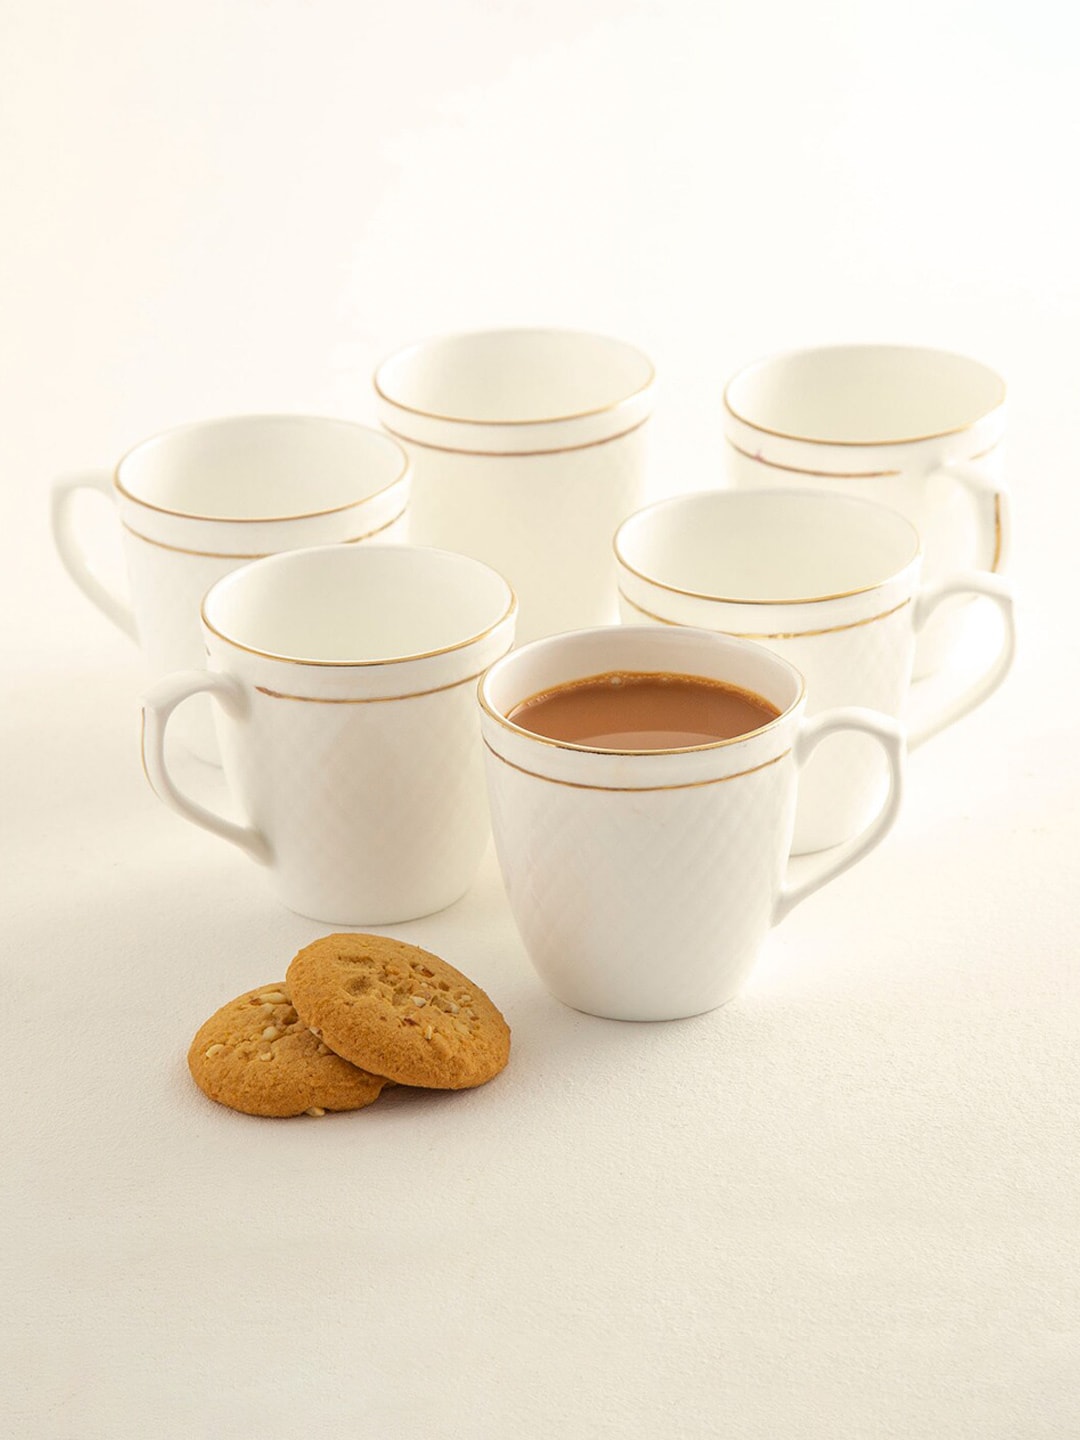 Home Centre Set of 6 White & Gold-Toned Textured Bone China Glossy Mugs Price in India